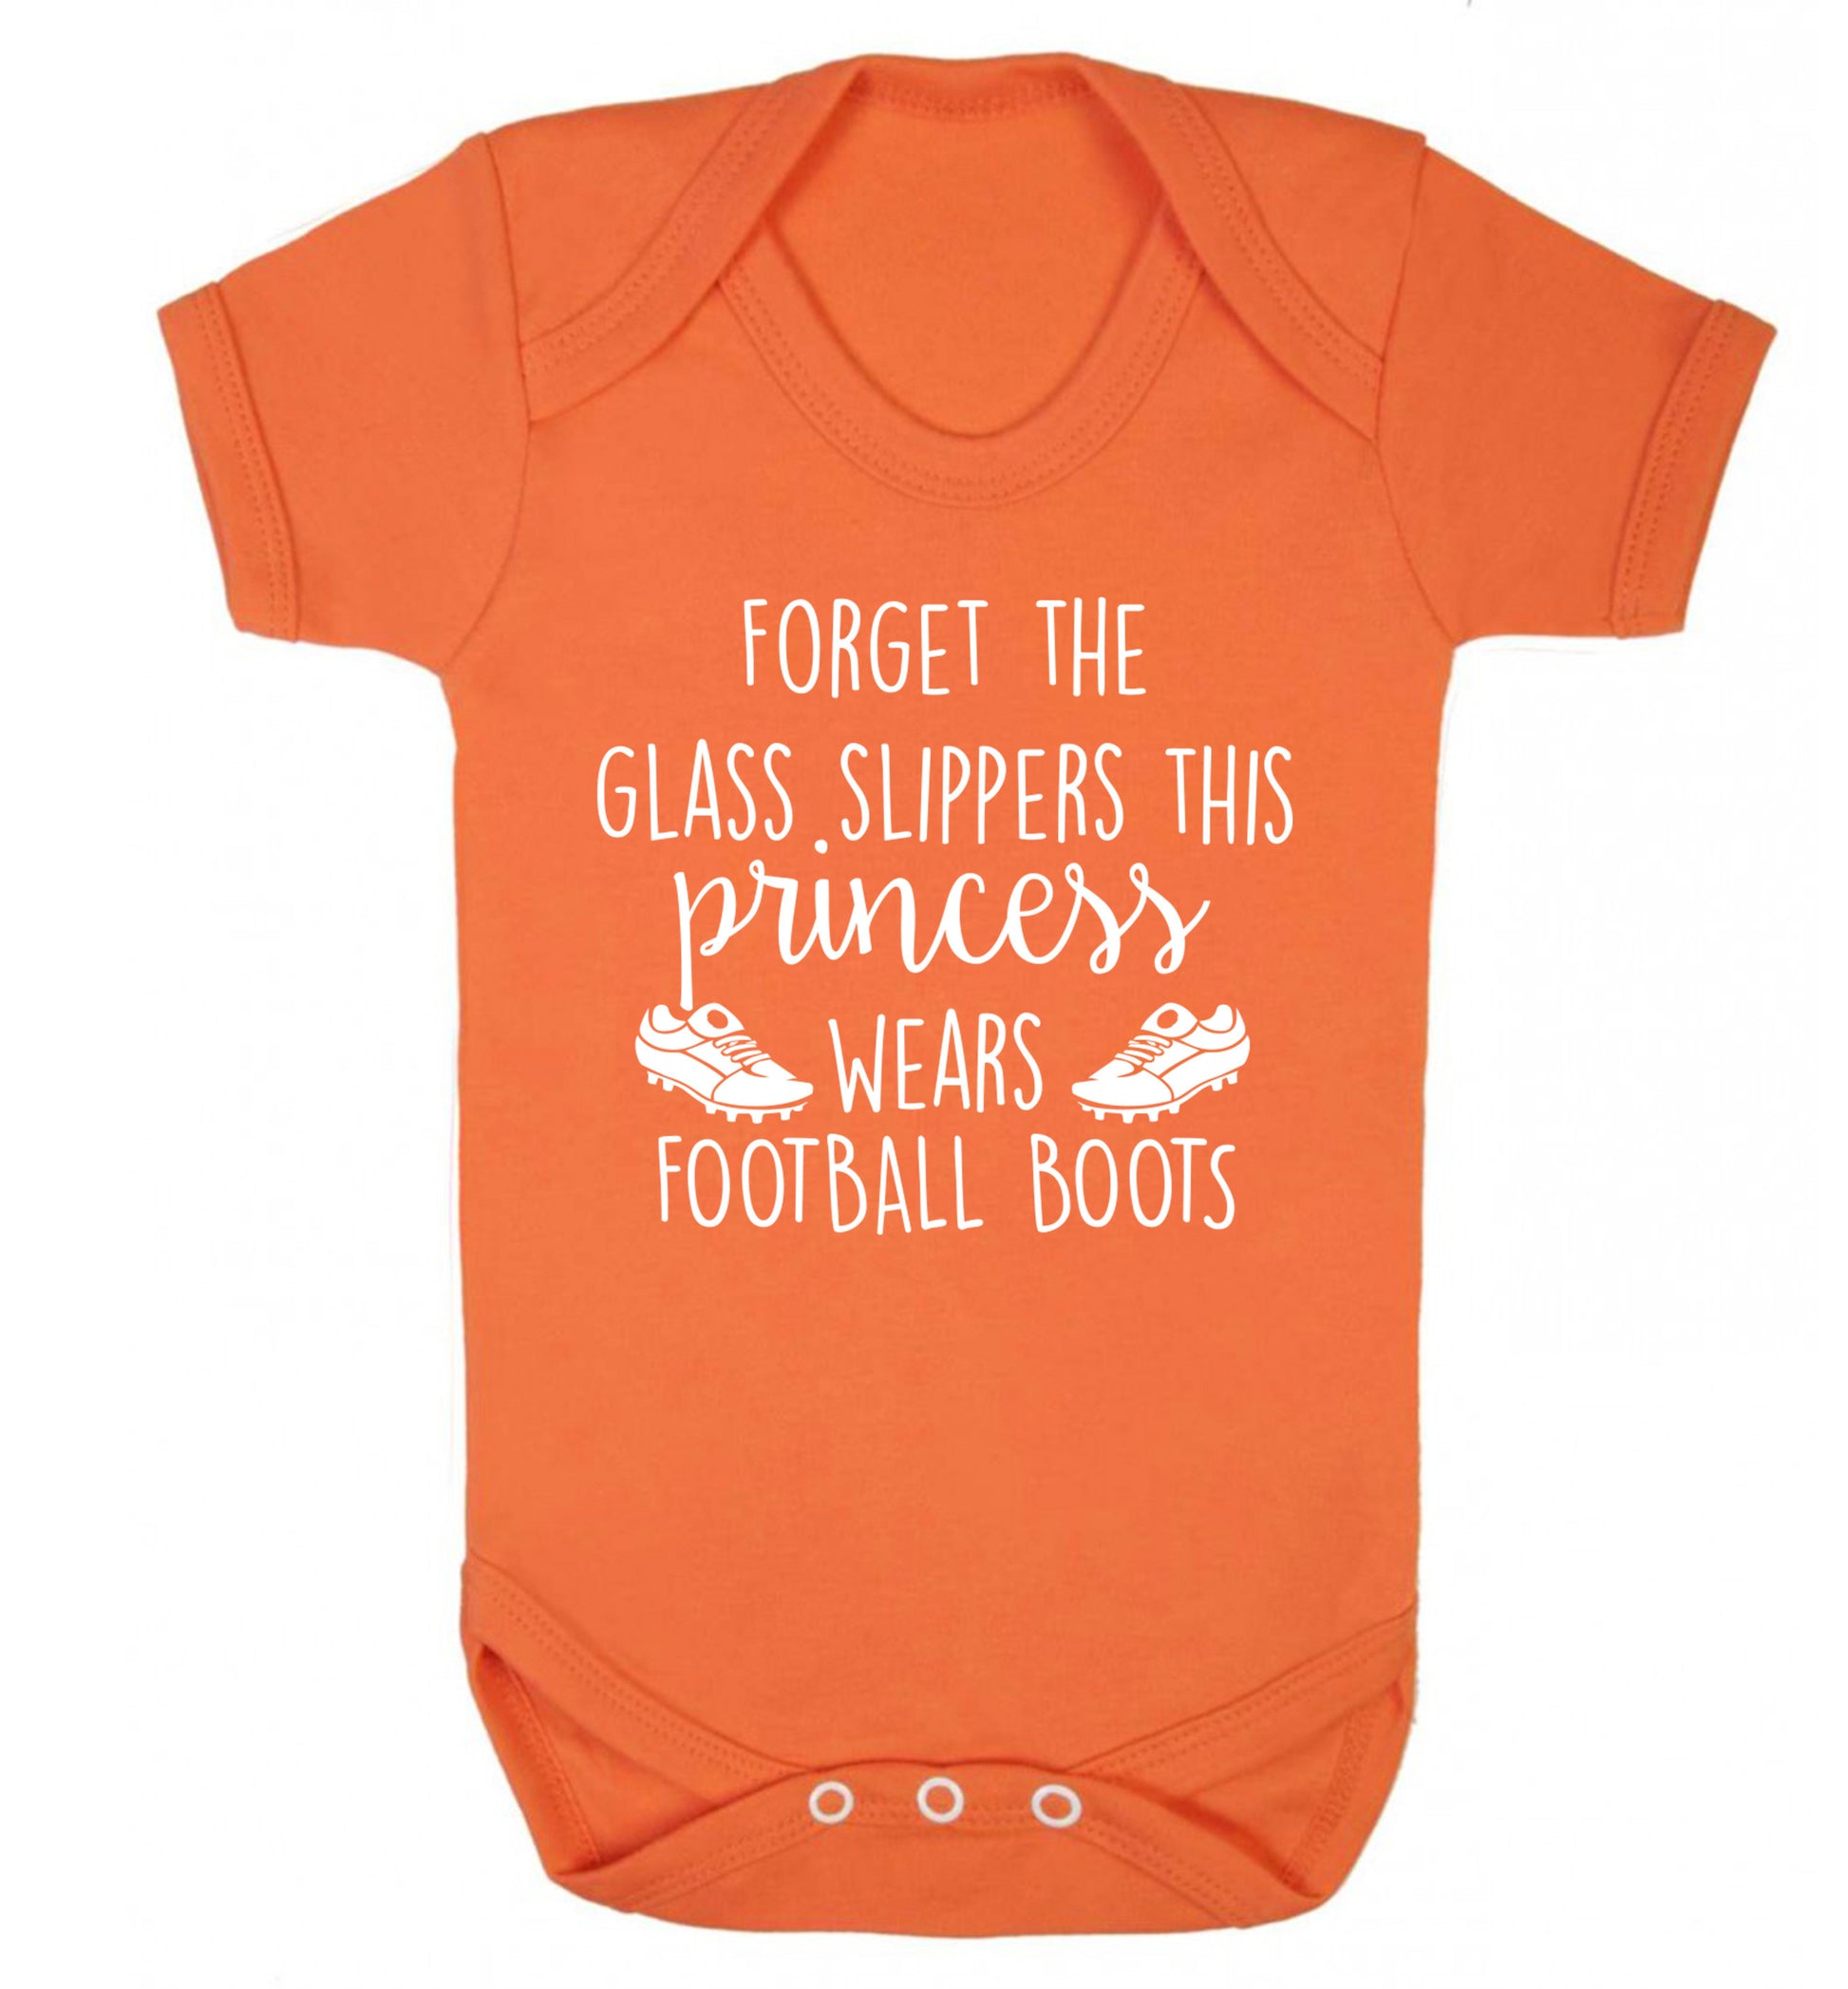 Forget the glass slippers this princess wears football boots Baby Vest orange 18-24 months